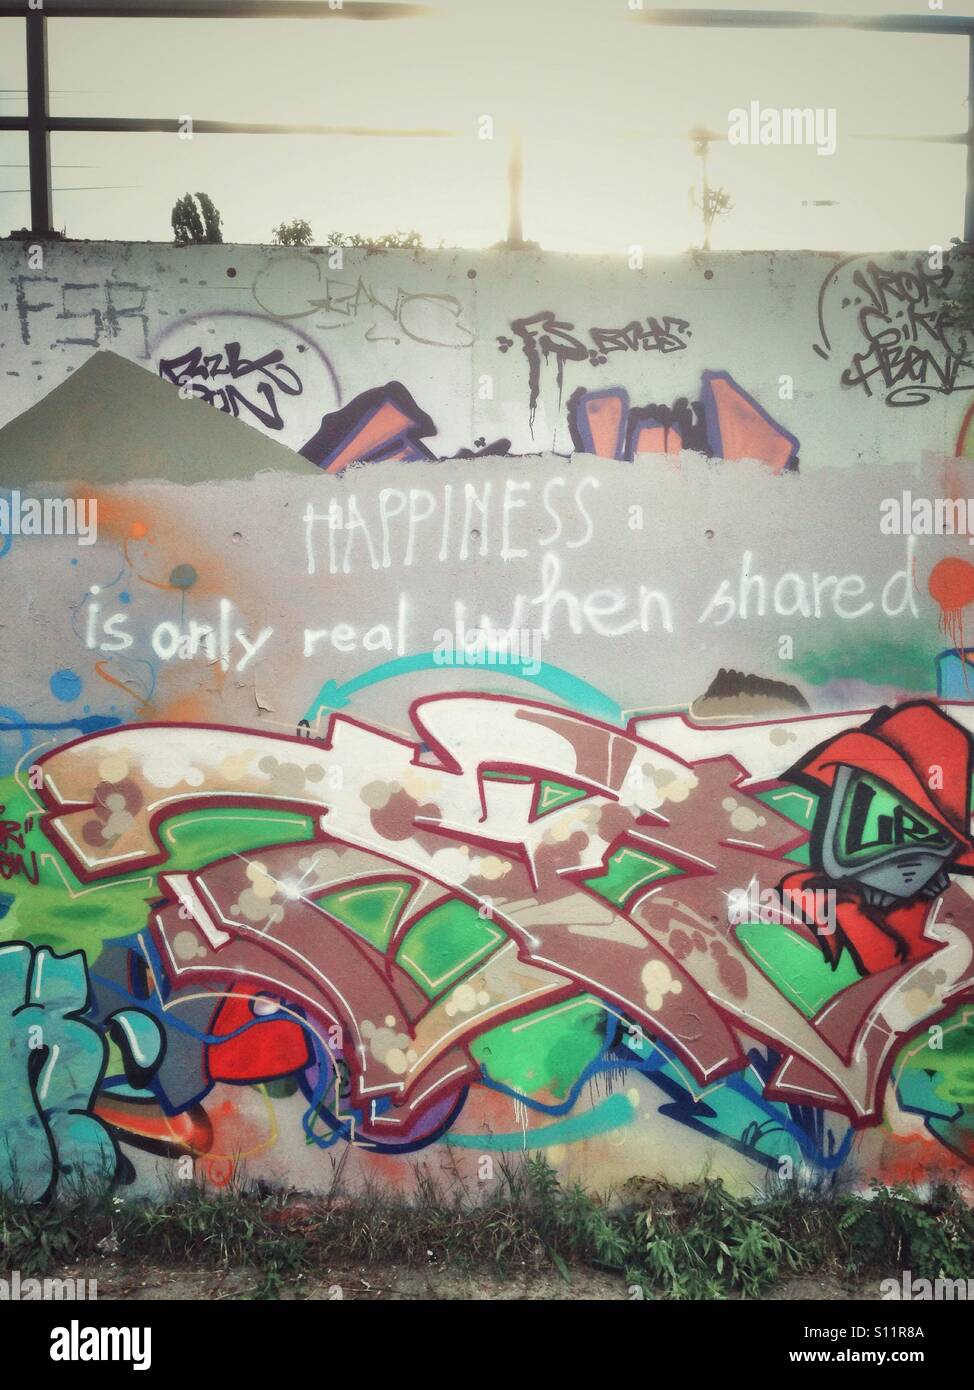 Happiness is only real when shared graffiti on a public graffiti wall in the Berlin Park am Gleisdreieck, Germany Stock Photo